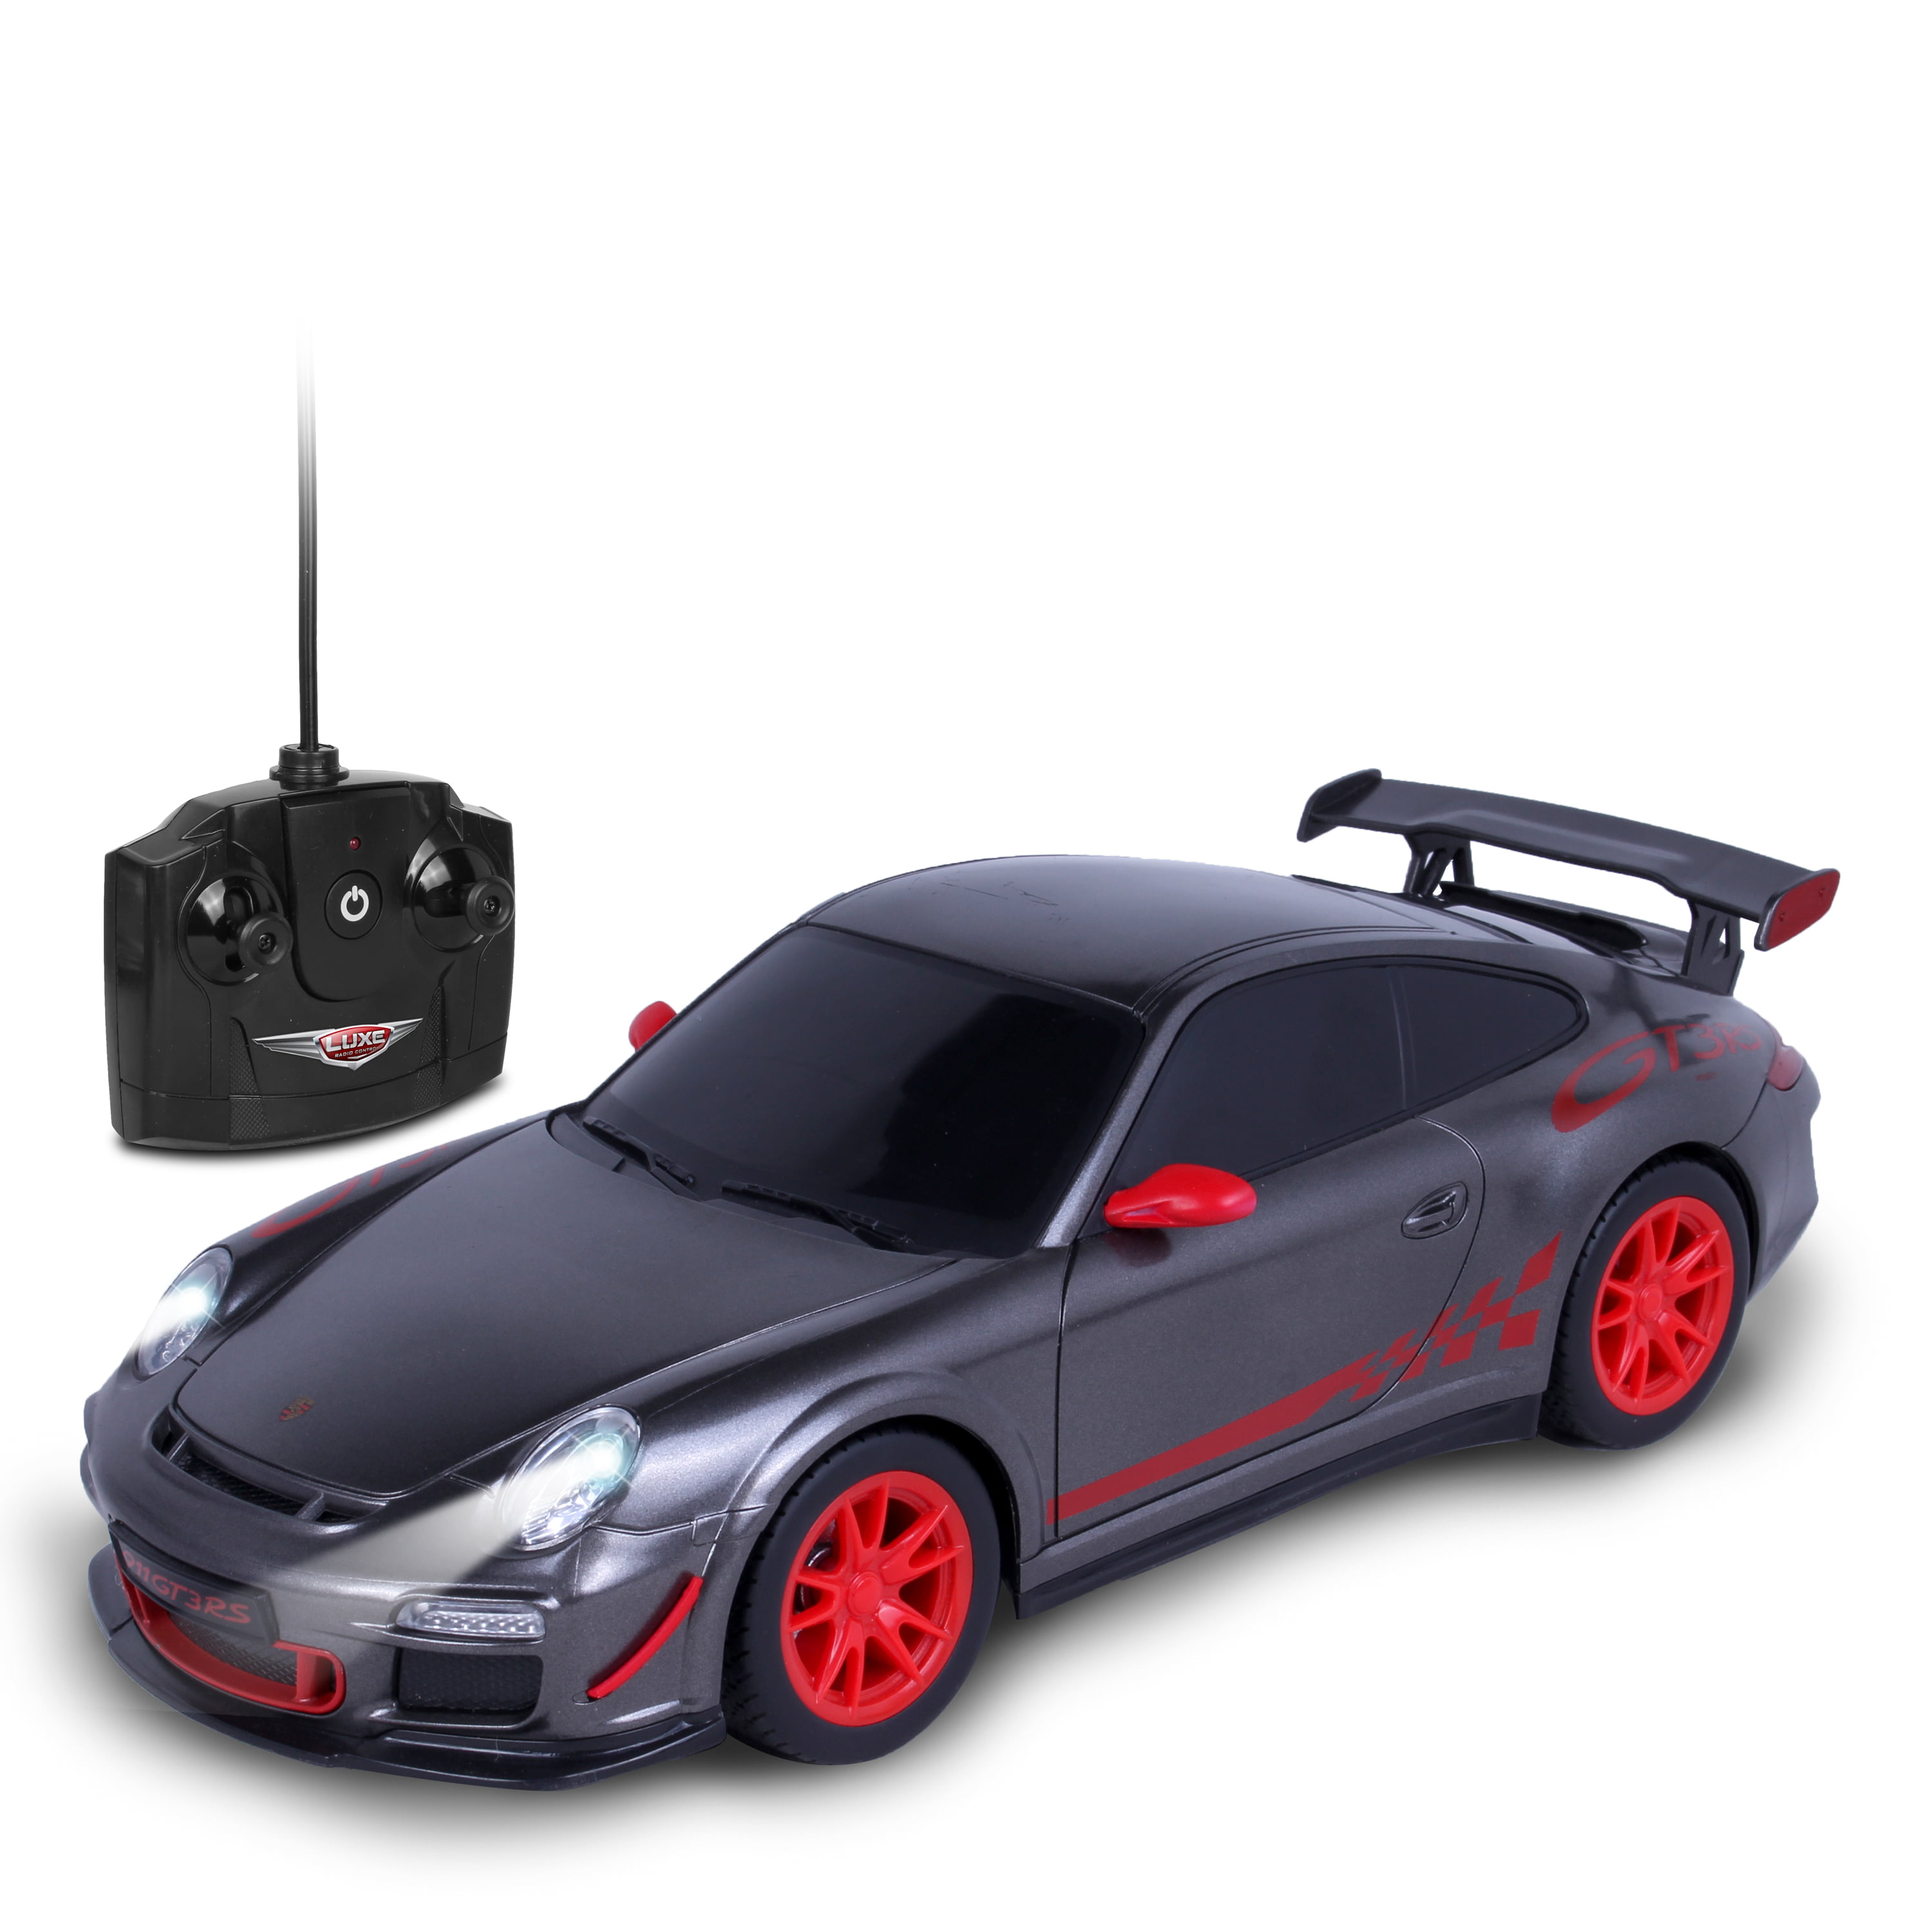 Remote Controlled Porsche Race Car w/ Lights RC Toy Rechargeable Battery 1:18 